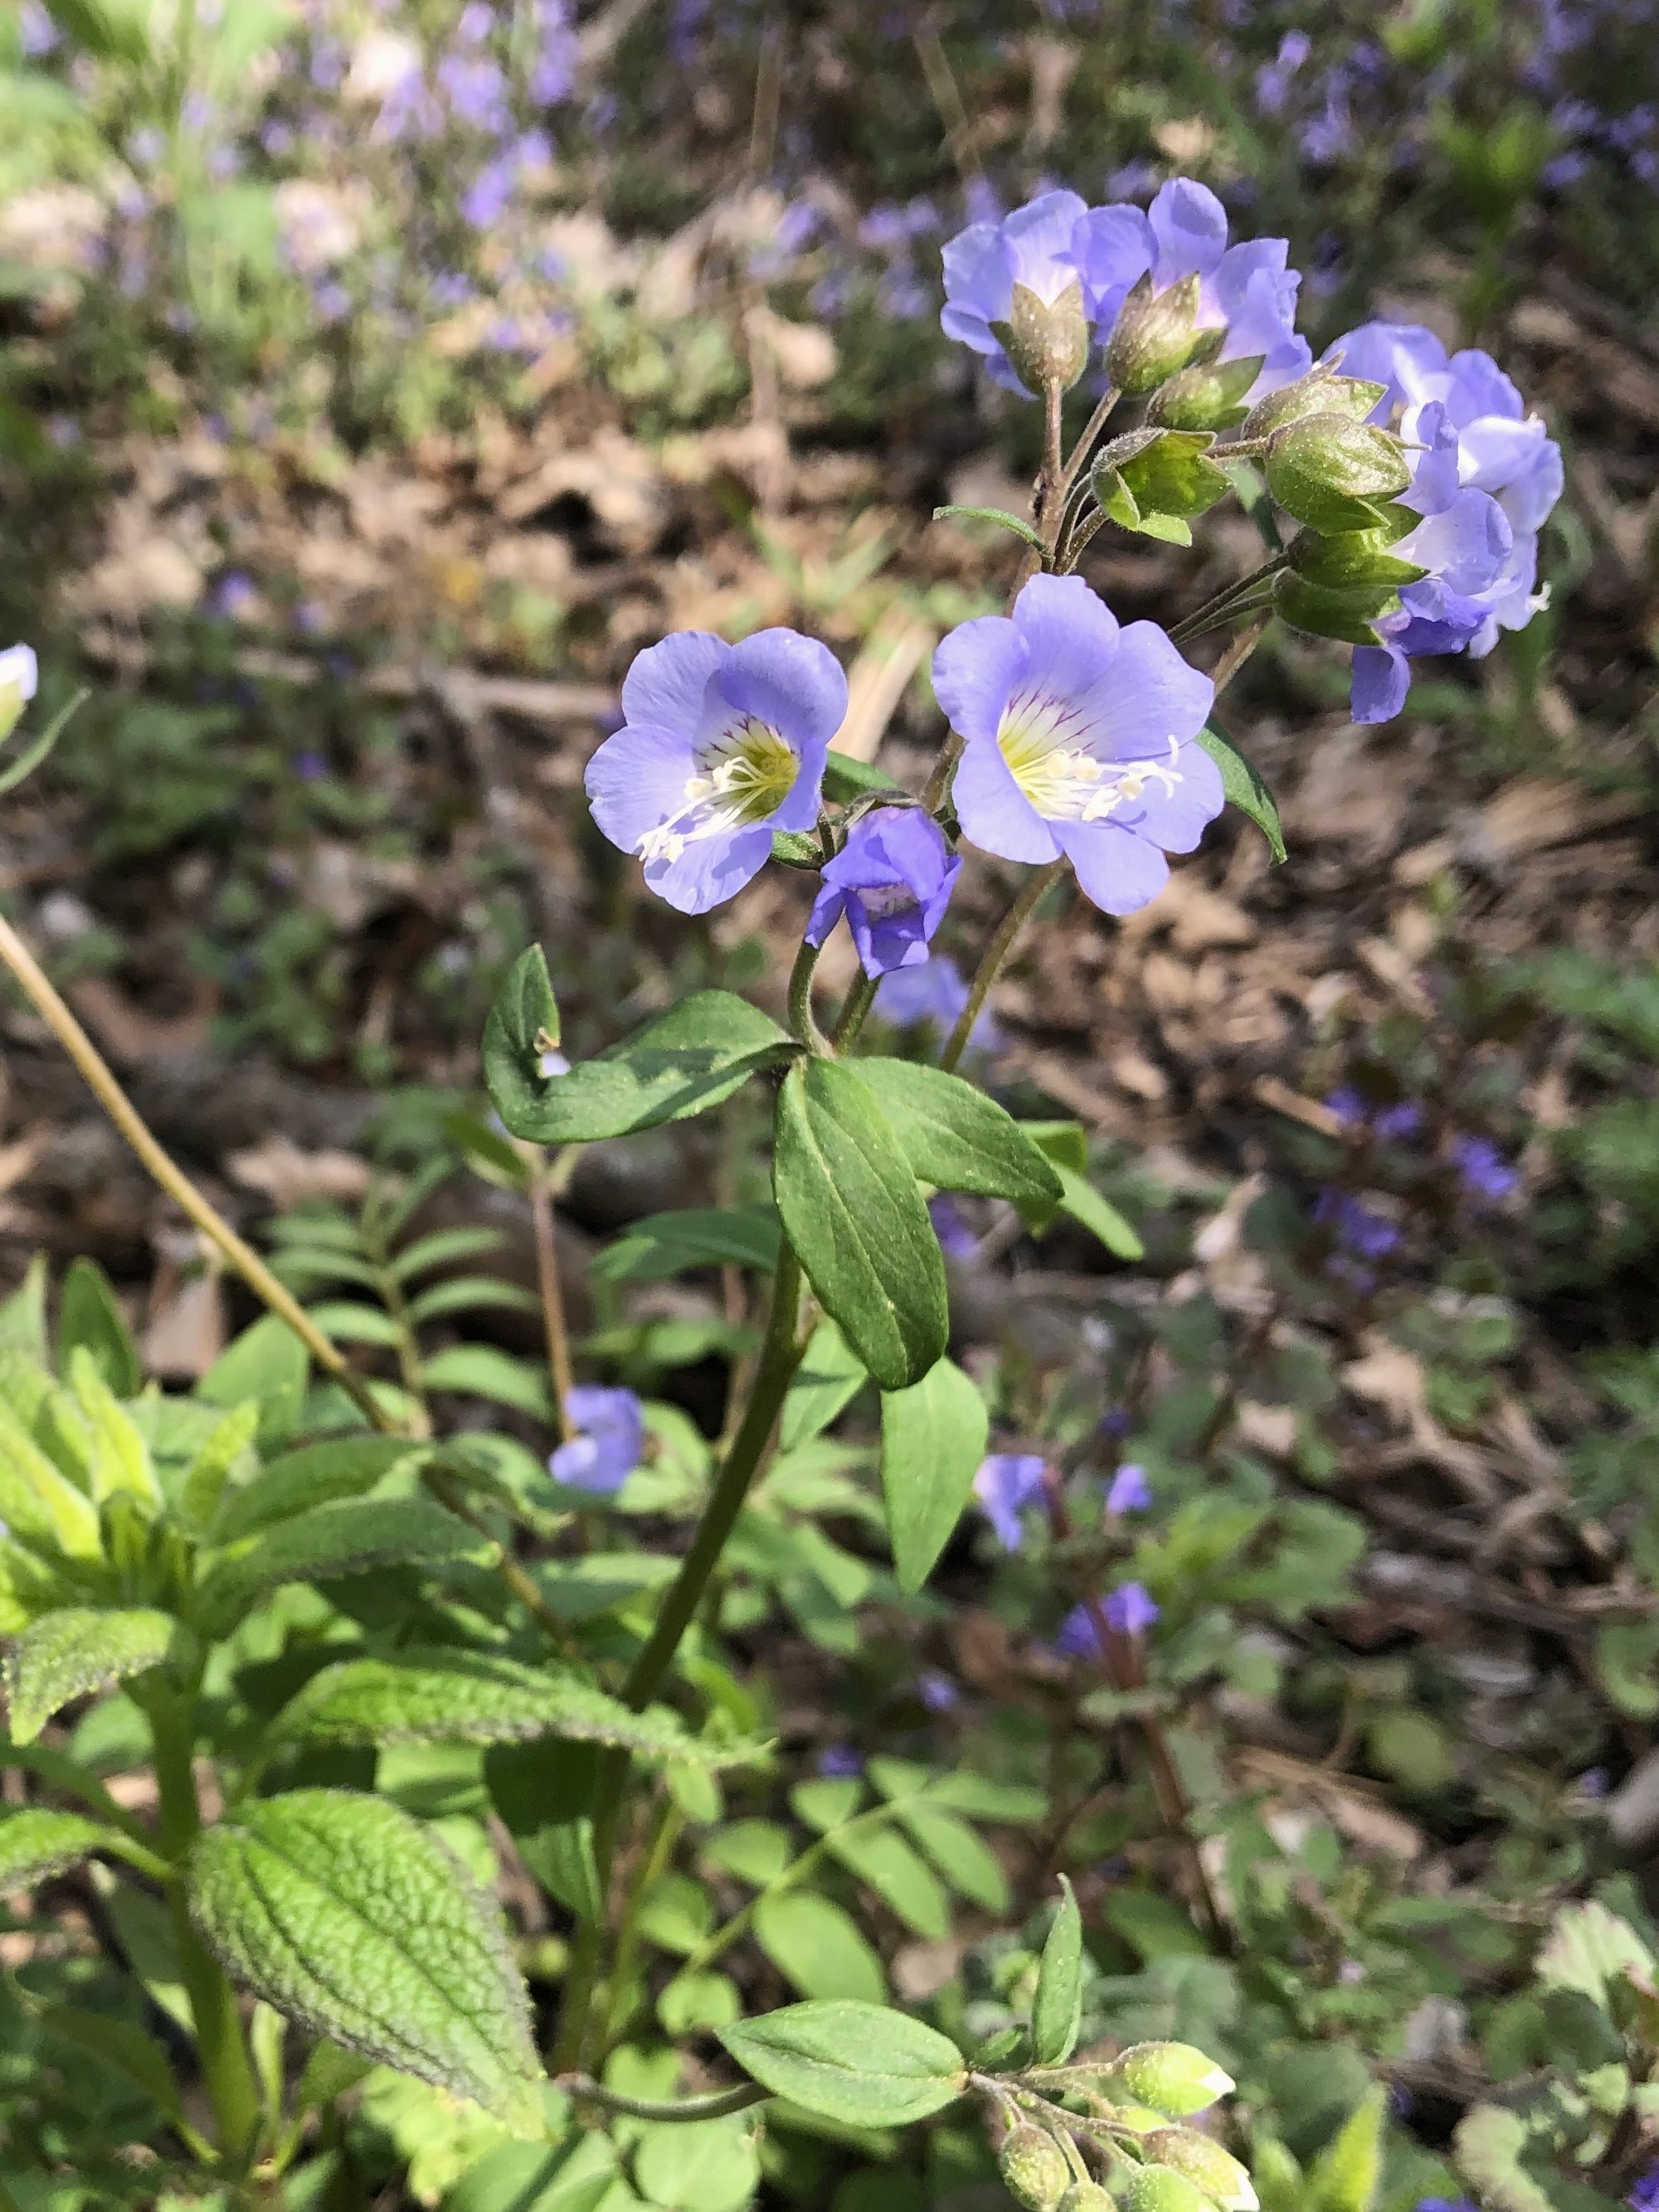 Jacob's Ladder in Oak Savanna in Madison, Wisconsin on May 2, 2021.